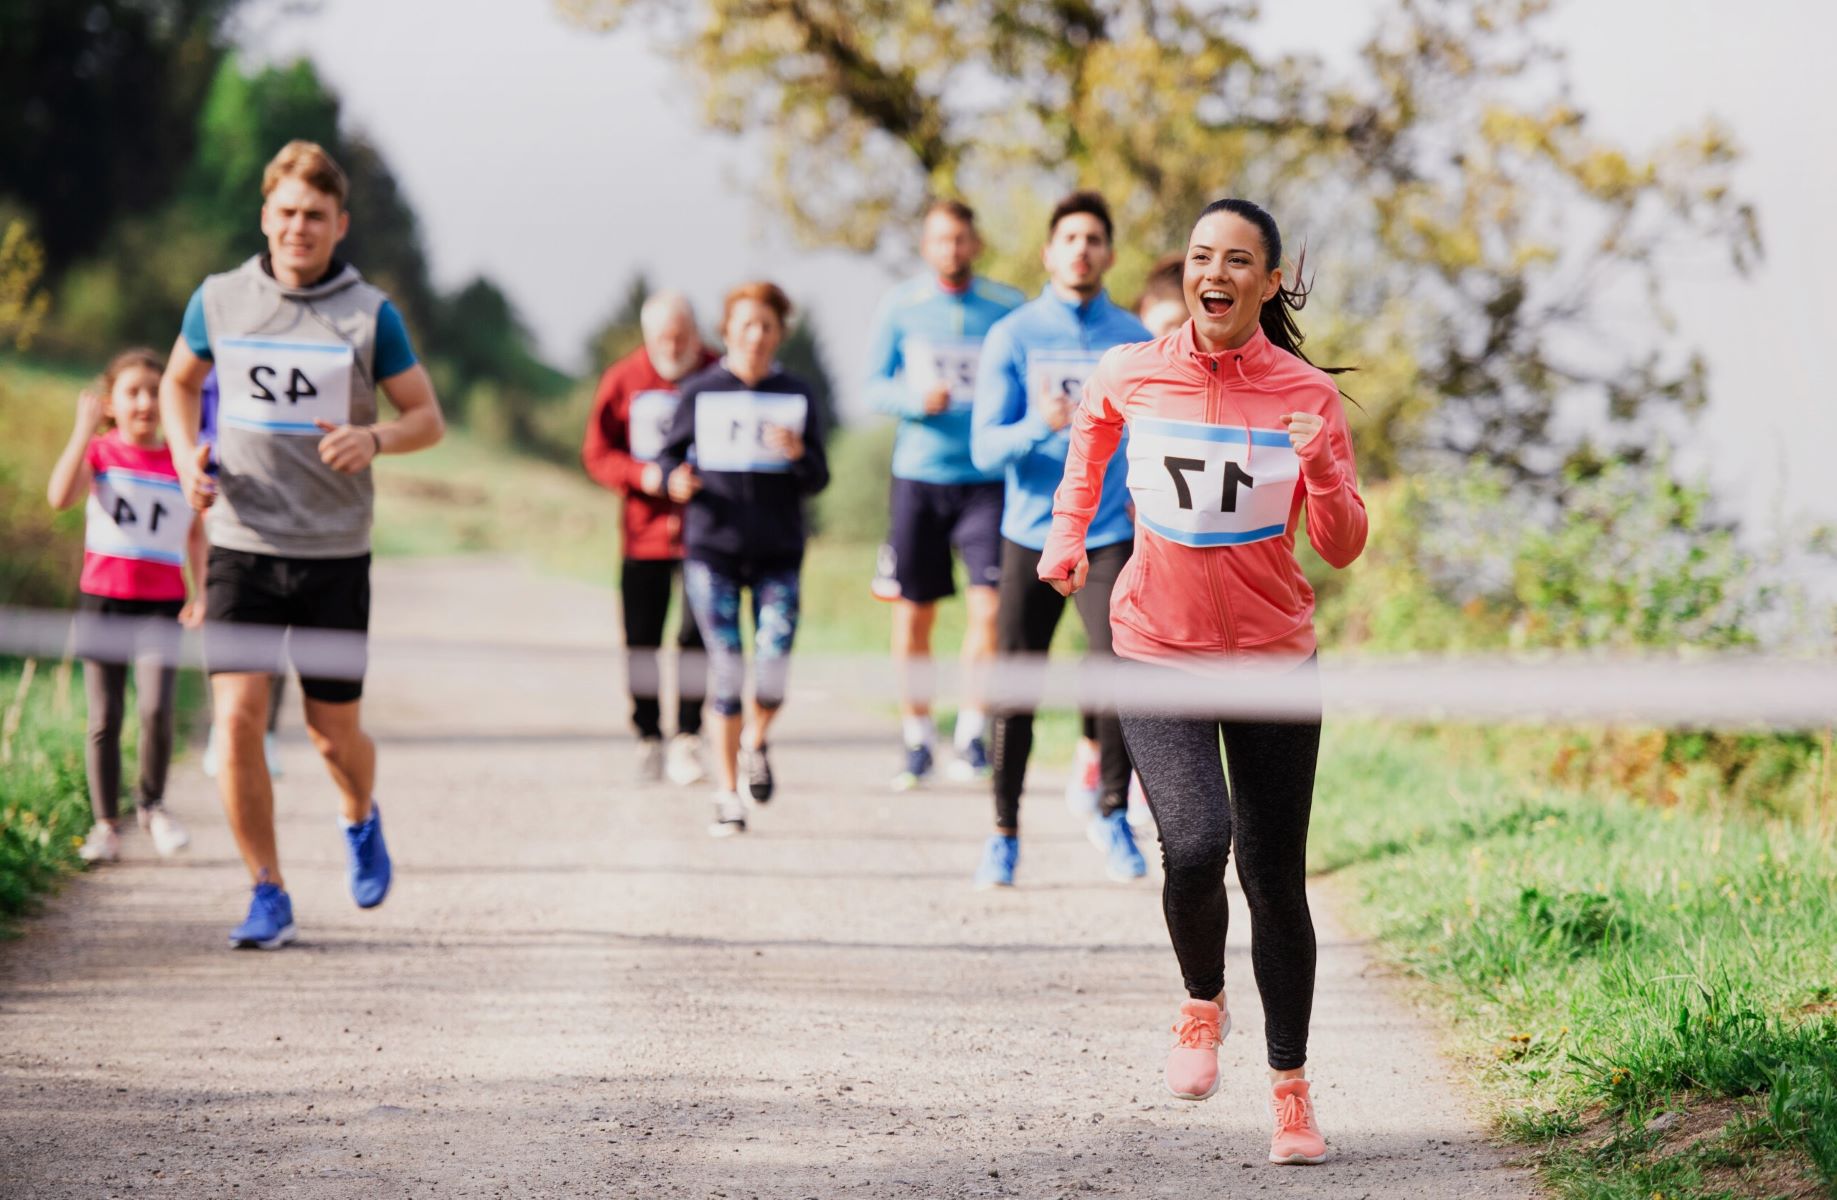 New To Running Marathons? Check Out These Essential Tips